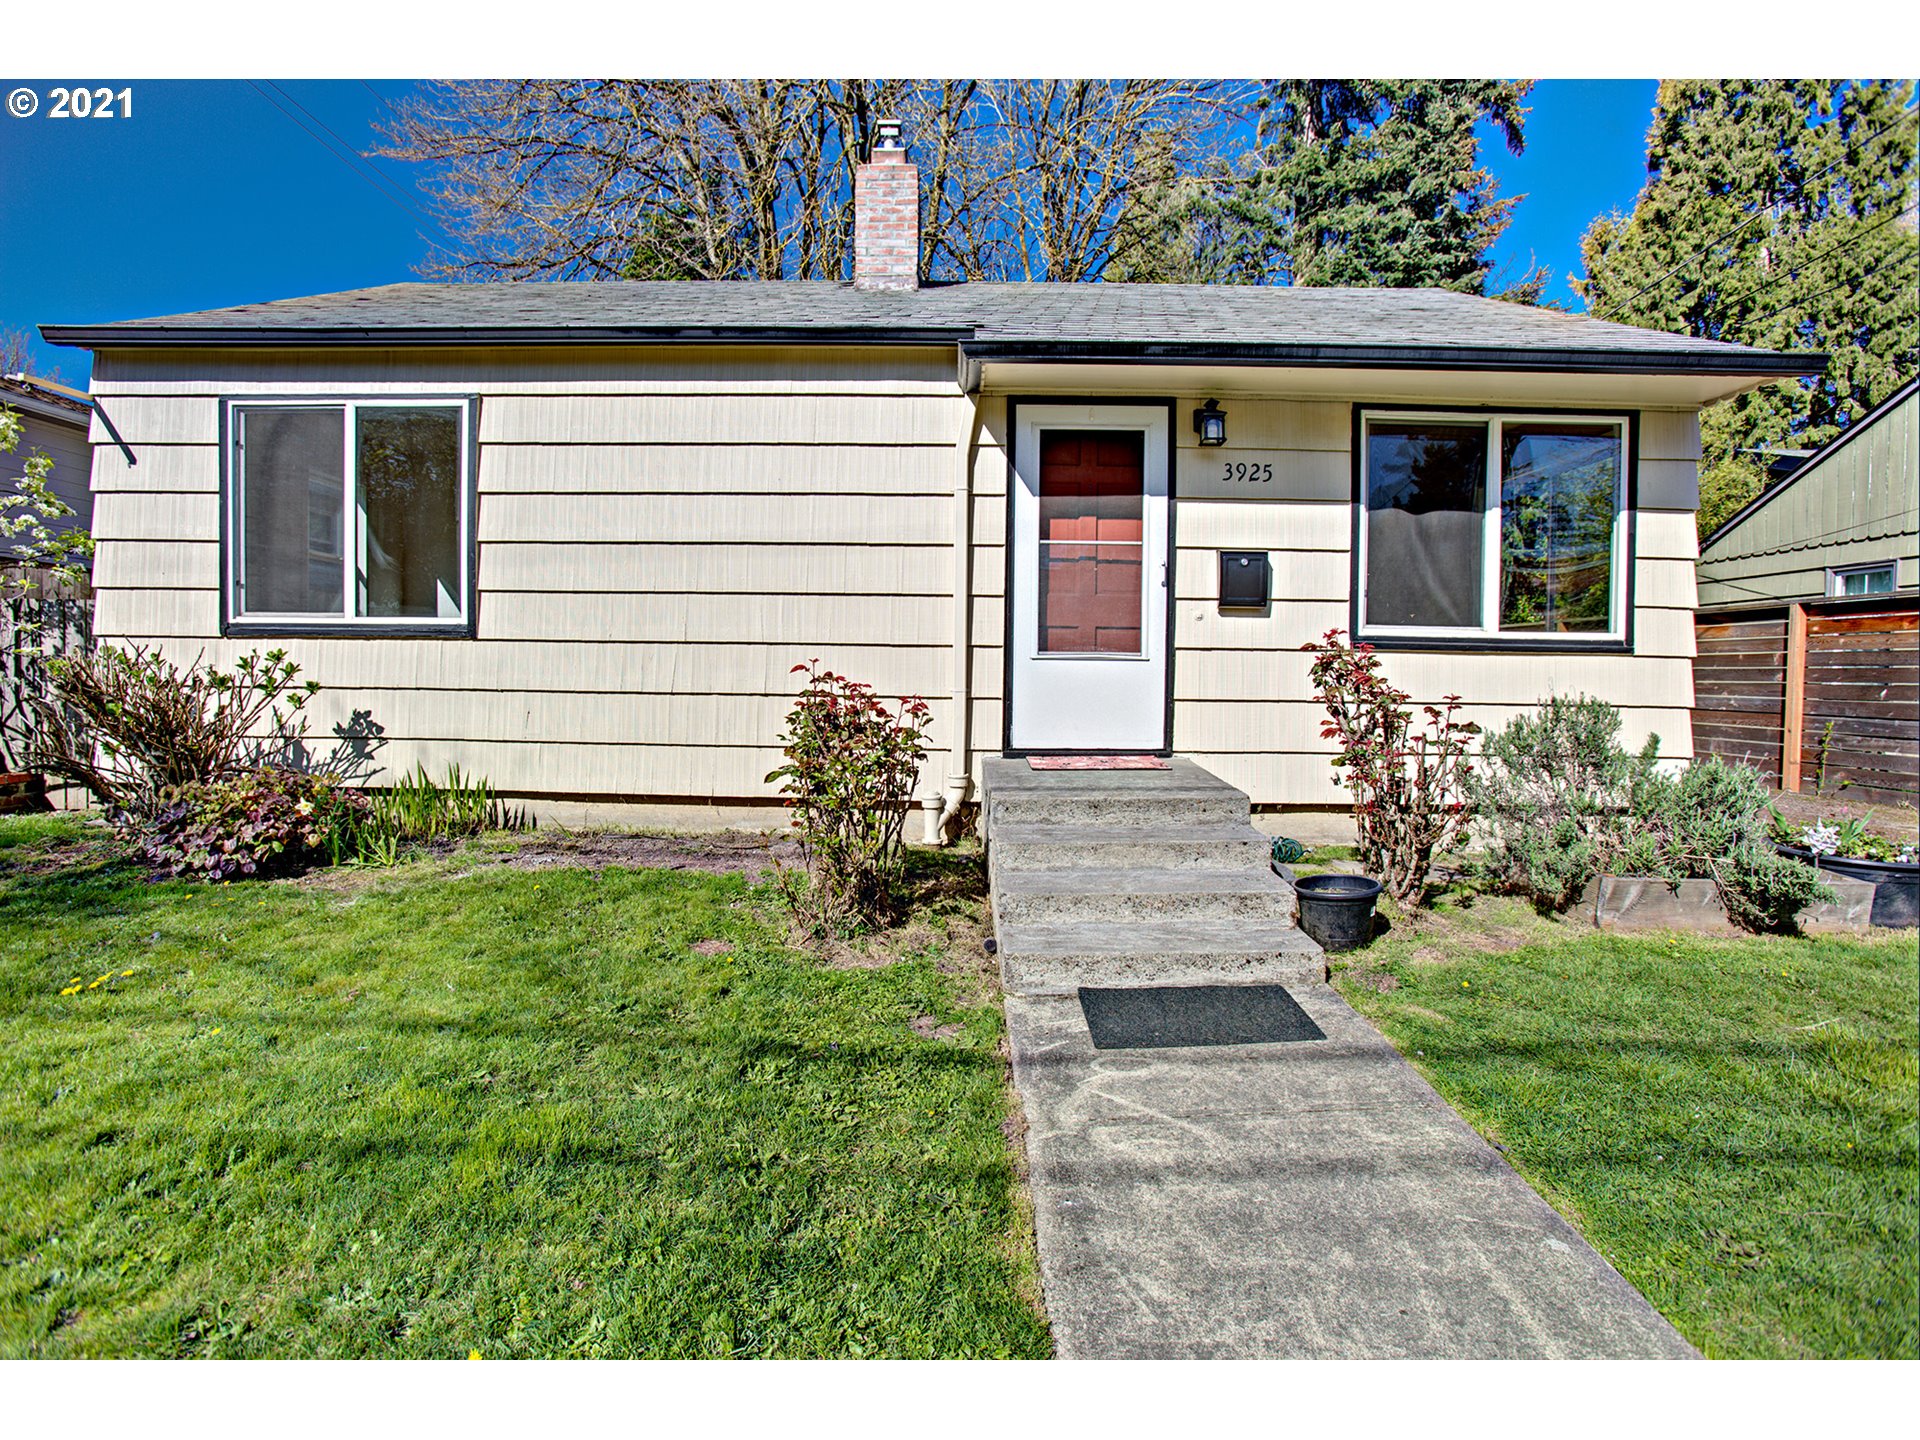 3925 SE 14TH AVE (1 of 24)